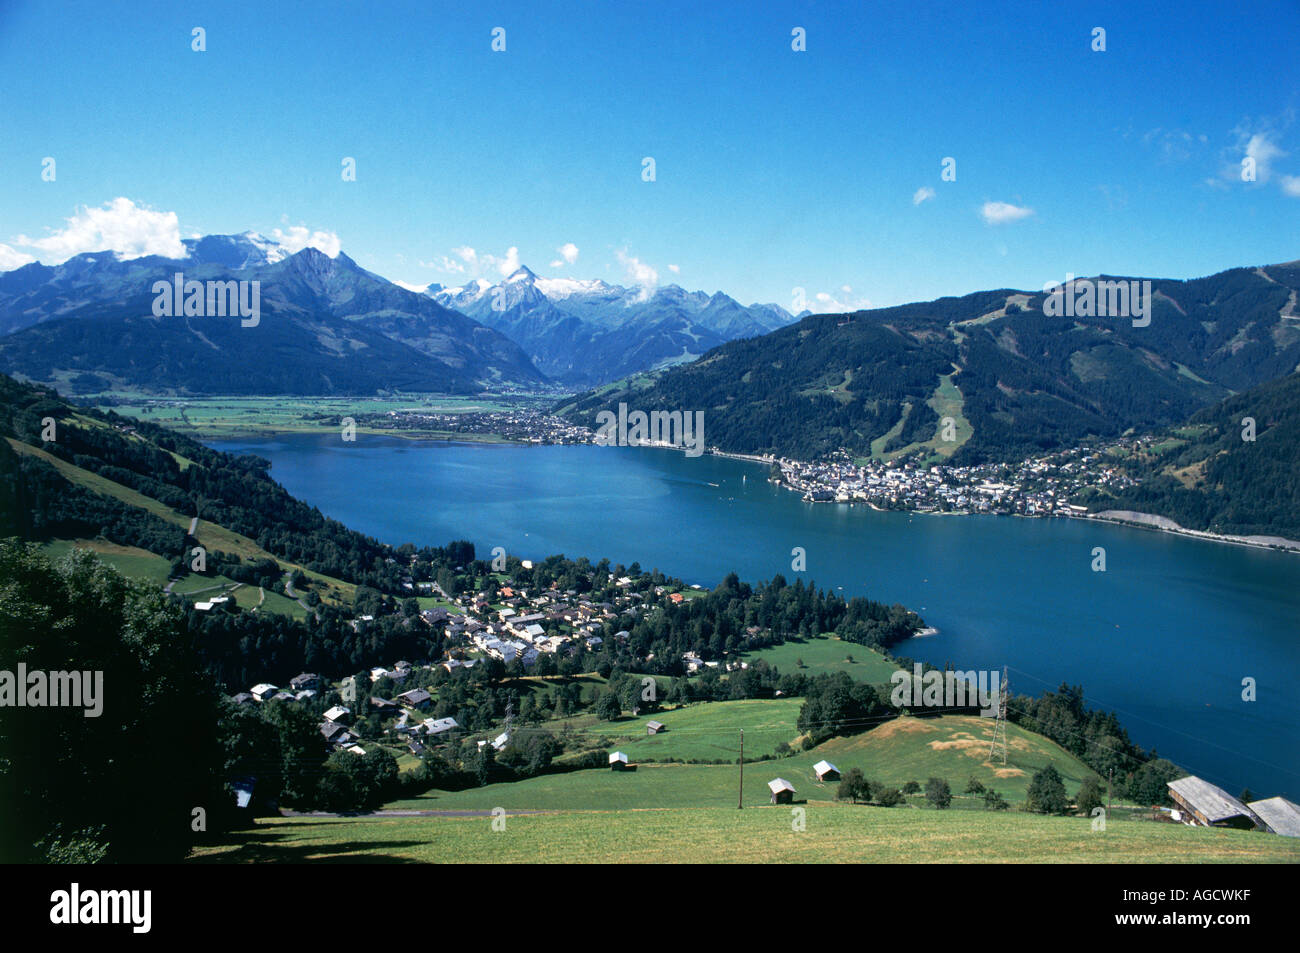 The villages of Thumersbach in the foreground and the town of Zell am Zee nestling on the western shores of the Zeller See overlooked by the the tall glacial peaks of the Hohe Tauern far to the south Stock Photo